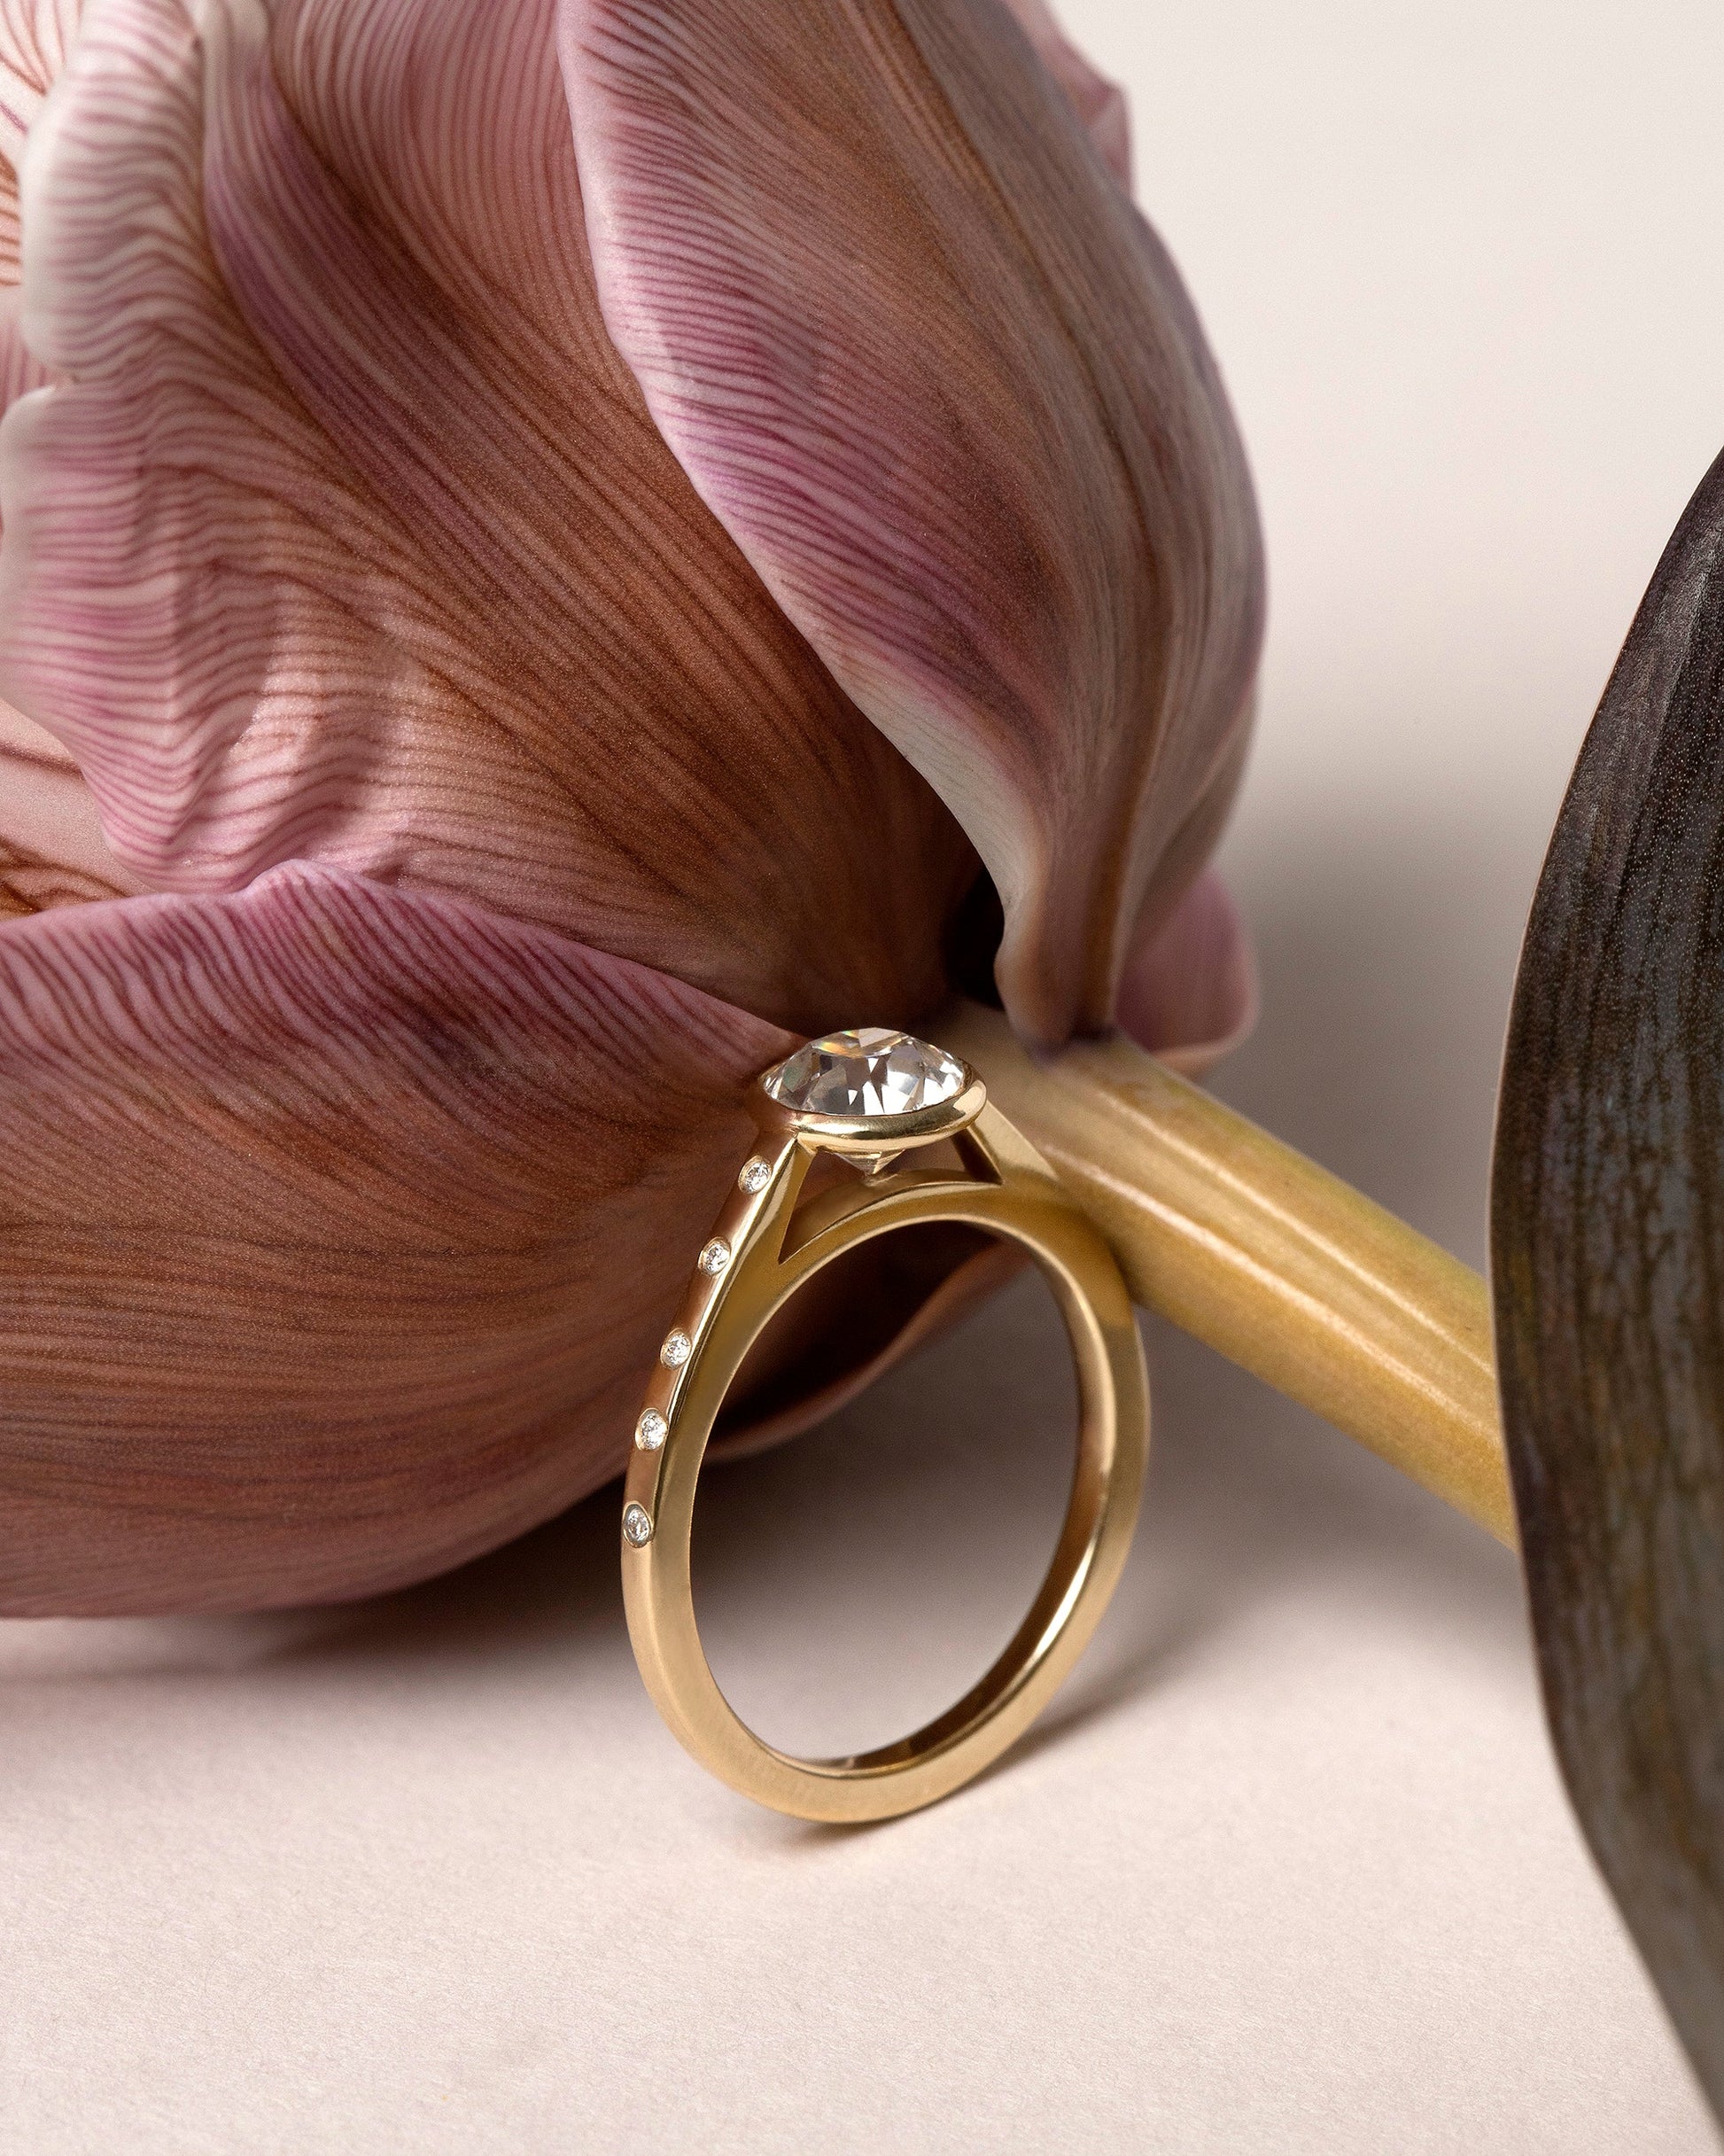 Styled image featuring the Calatrava Ring.